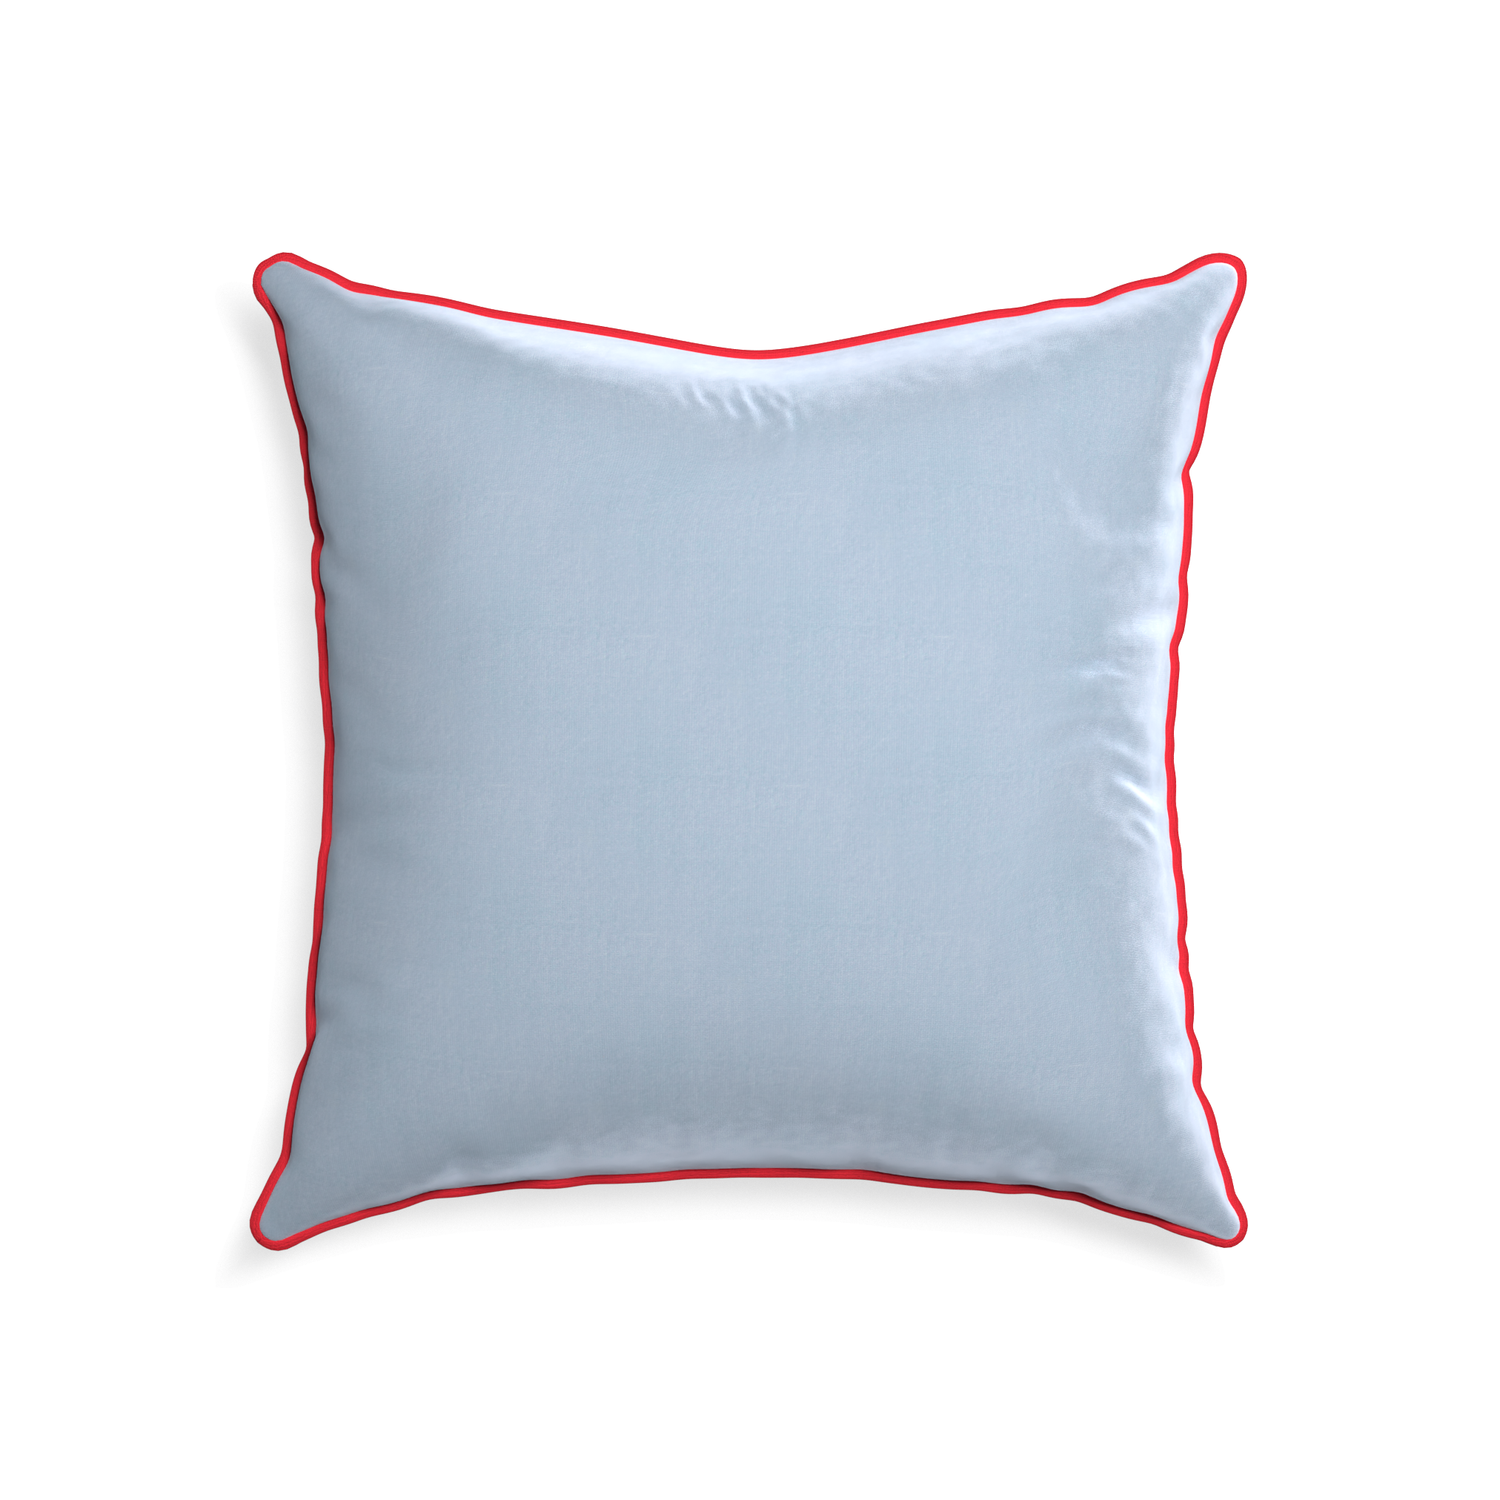 square light blue velvet pillow with red piping